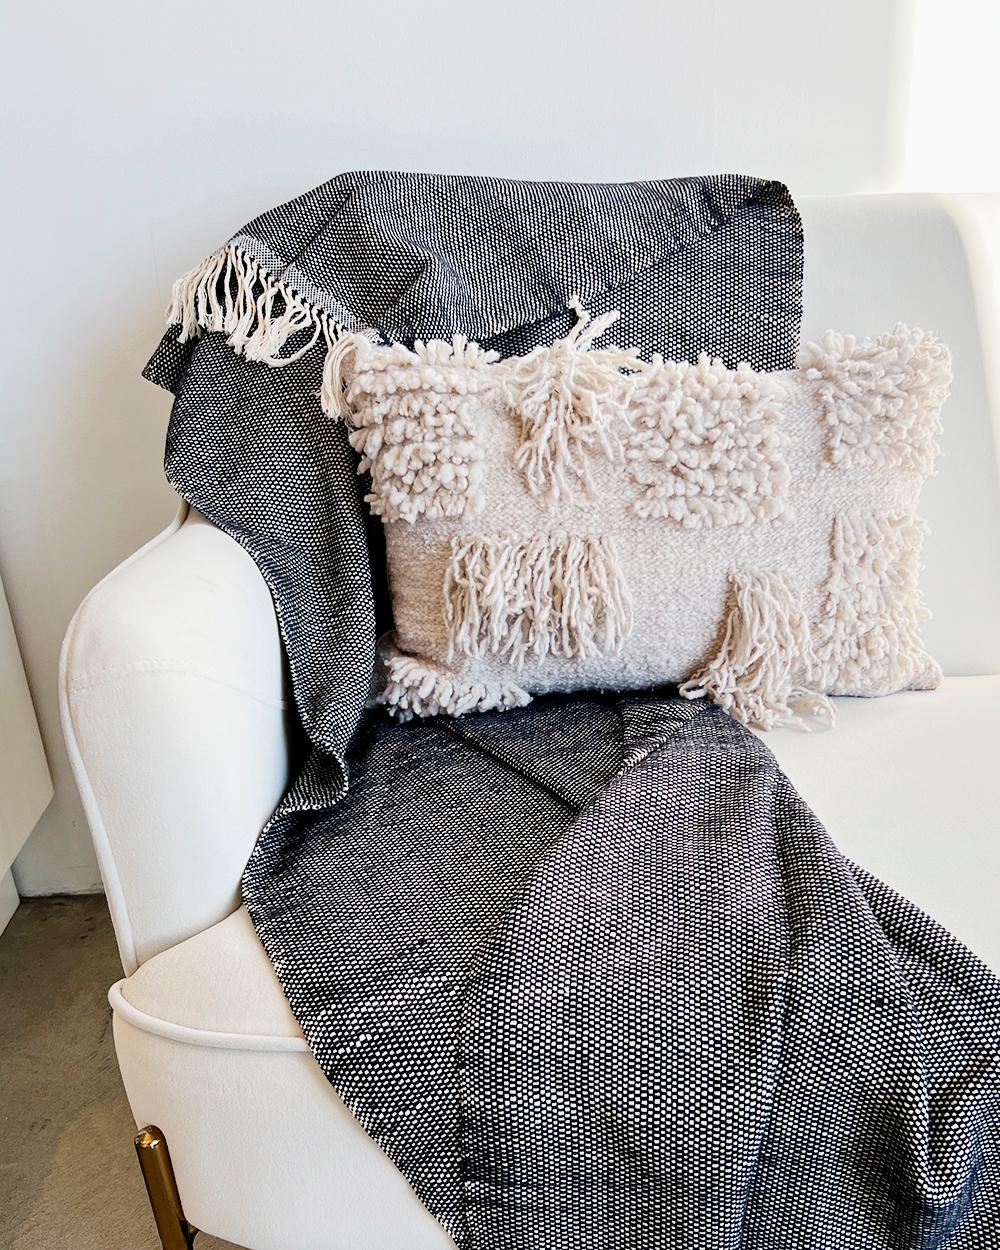 A crisp throw for your living room
Cuddle up in the cozy comfort of this luxe and lightweight Amano Throw. Crafted from organic cotton, its soft white and navy check weave design is sure to add a modern, minimalist flair to your space. With a crisp